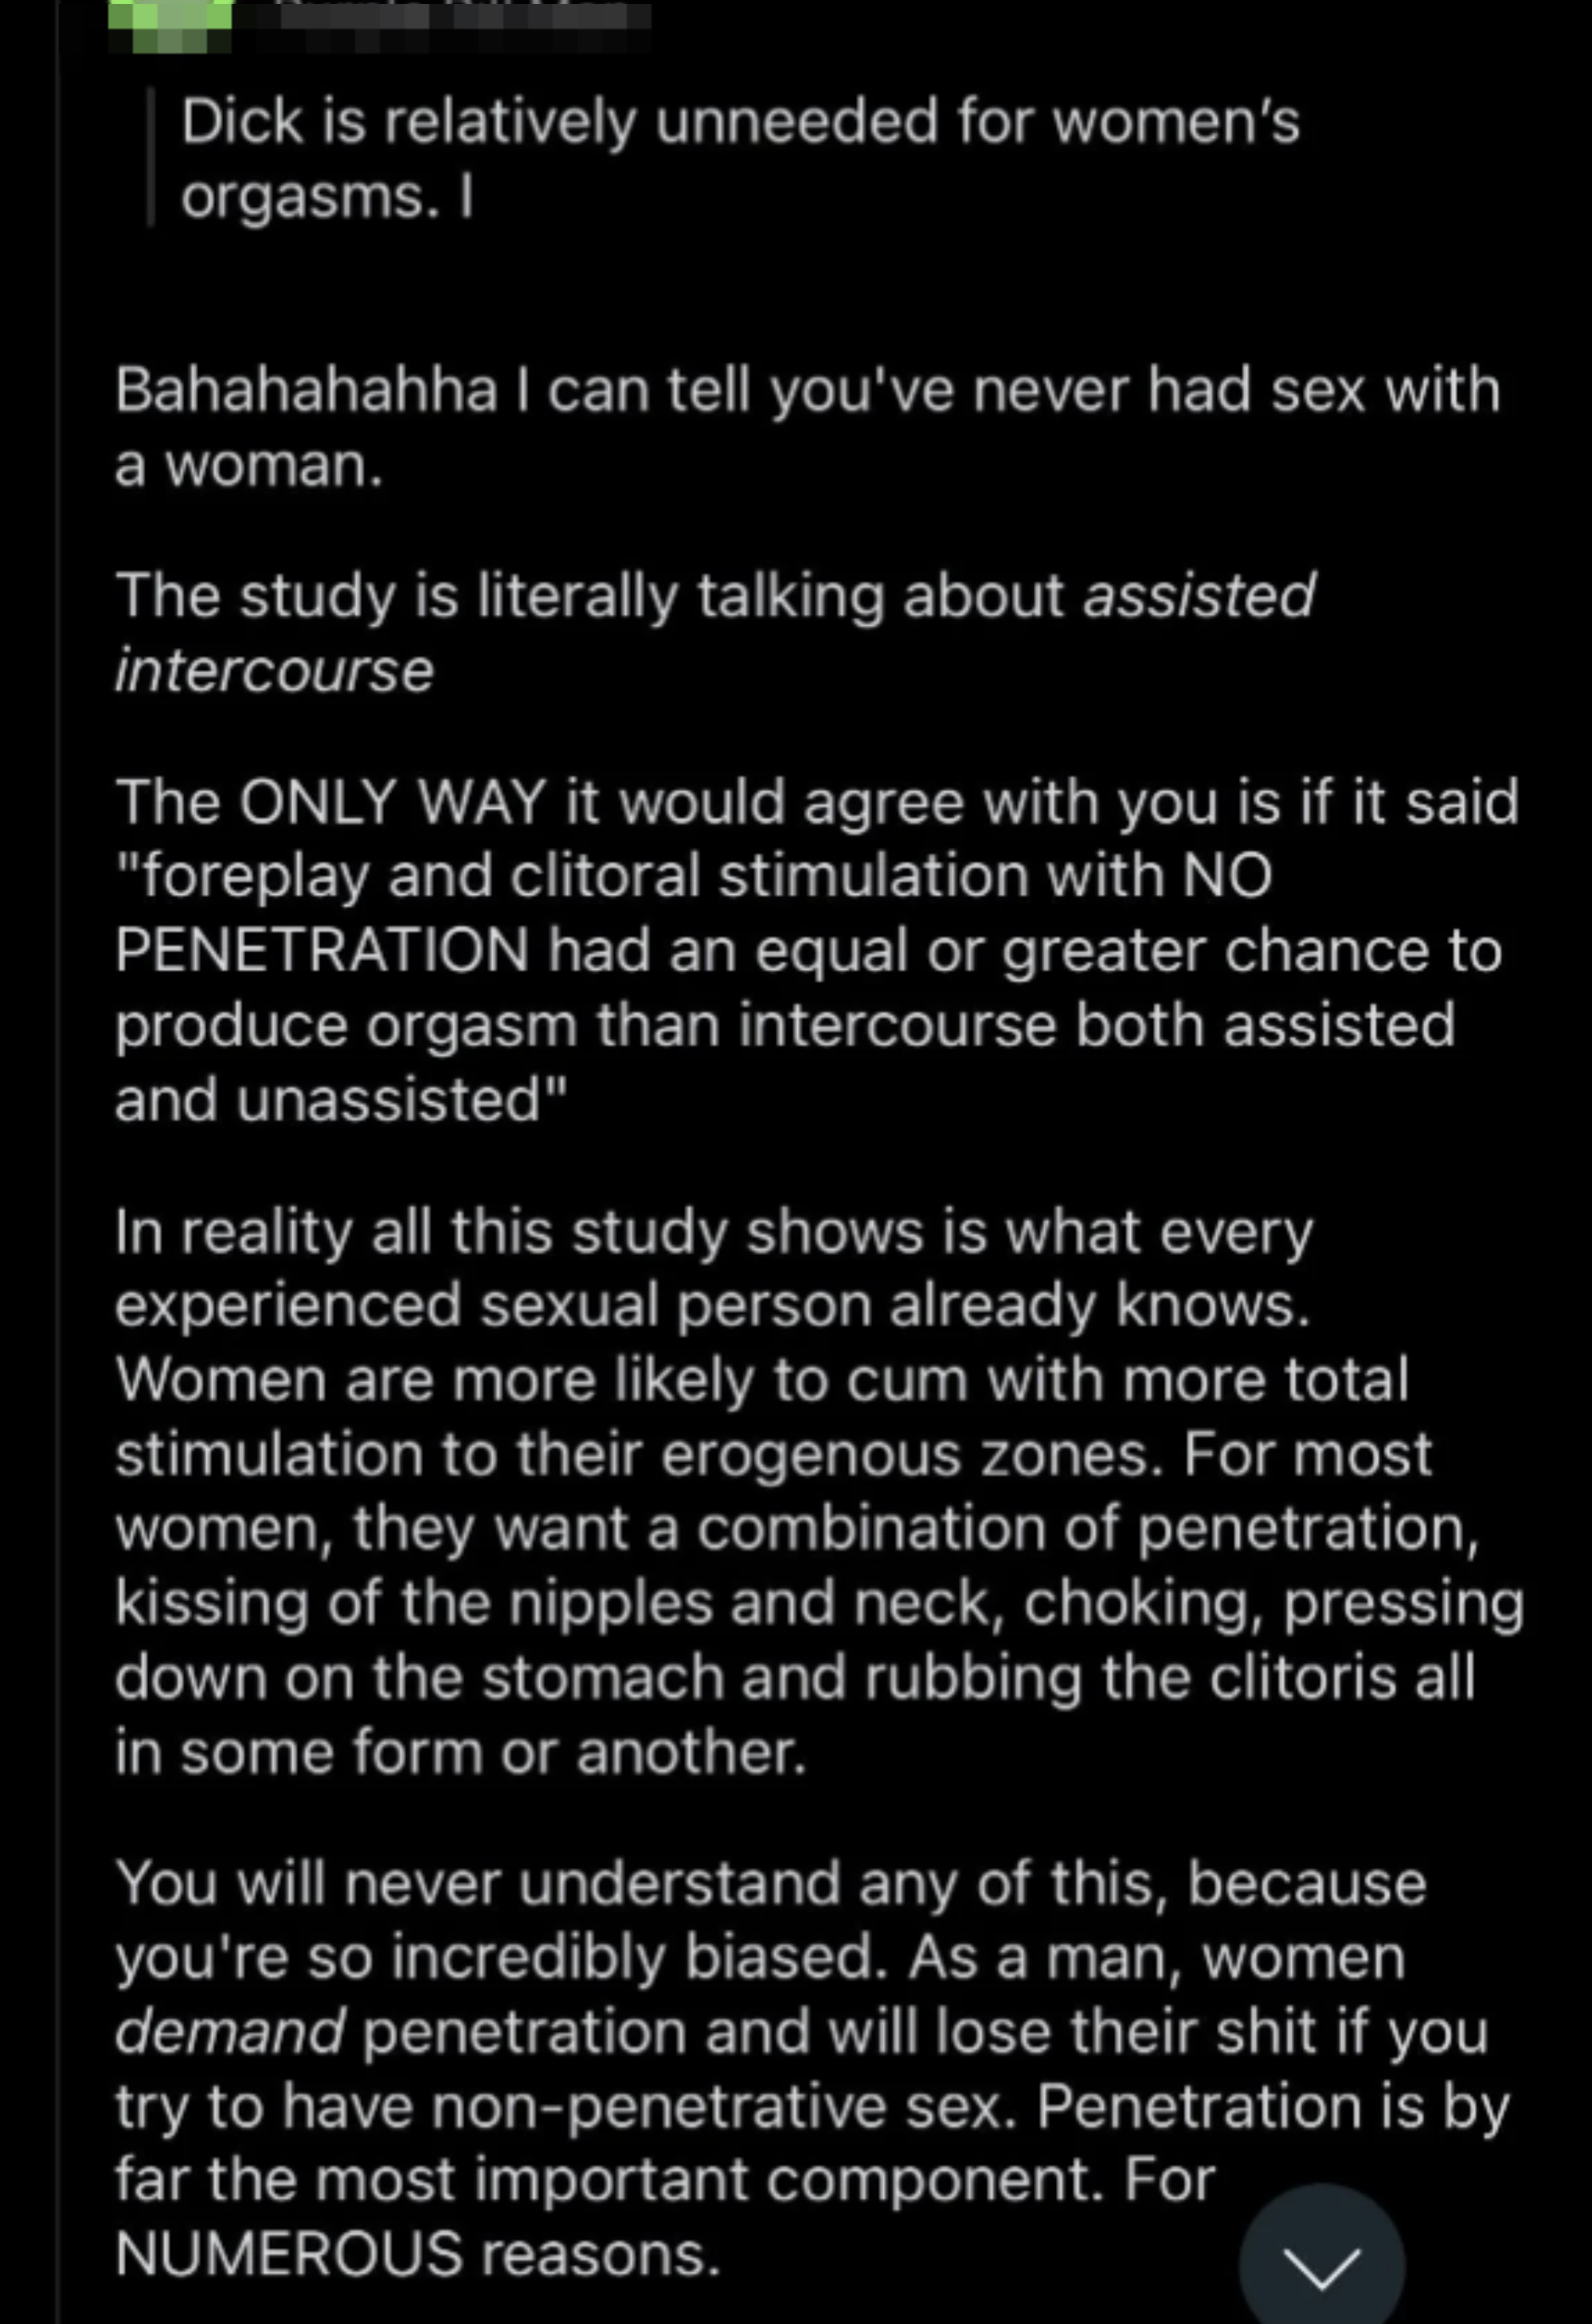 &quot;Women are more likely to cum with a combination of penetration, kissing of the nipples and neck, choking, pressing down on the stomach, and rubbing the clitoris&quot;; &quot;penetration is by far the most important component&quot;